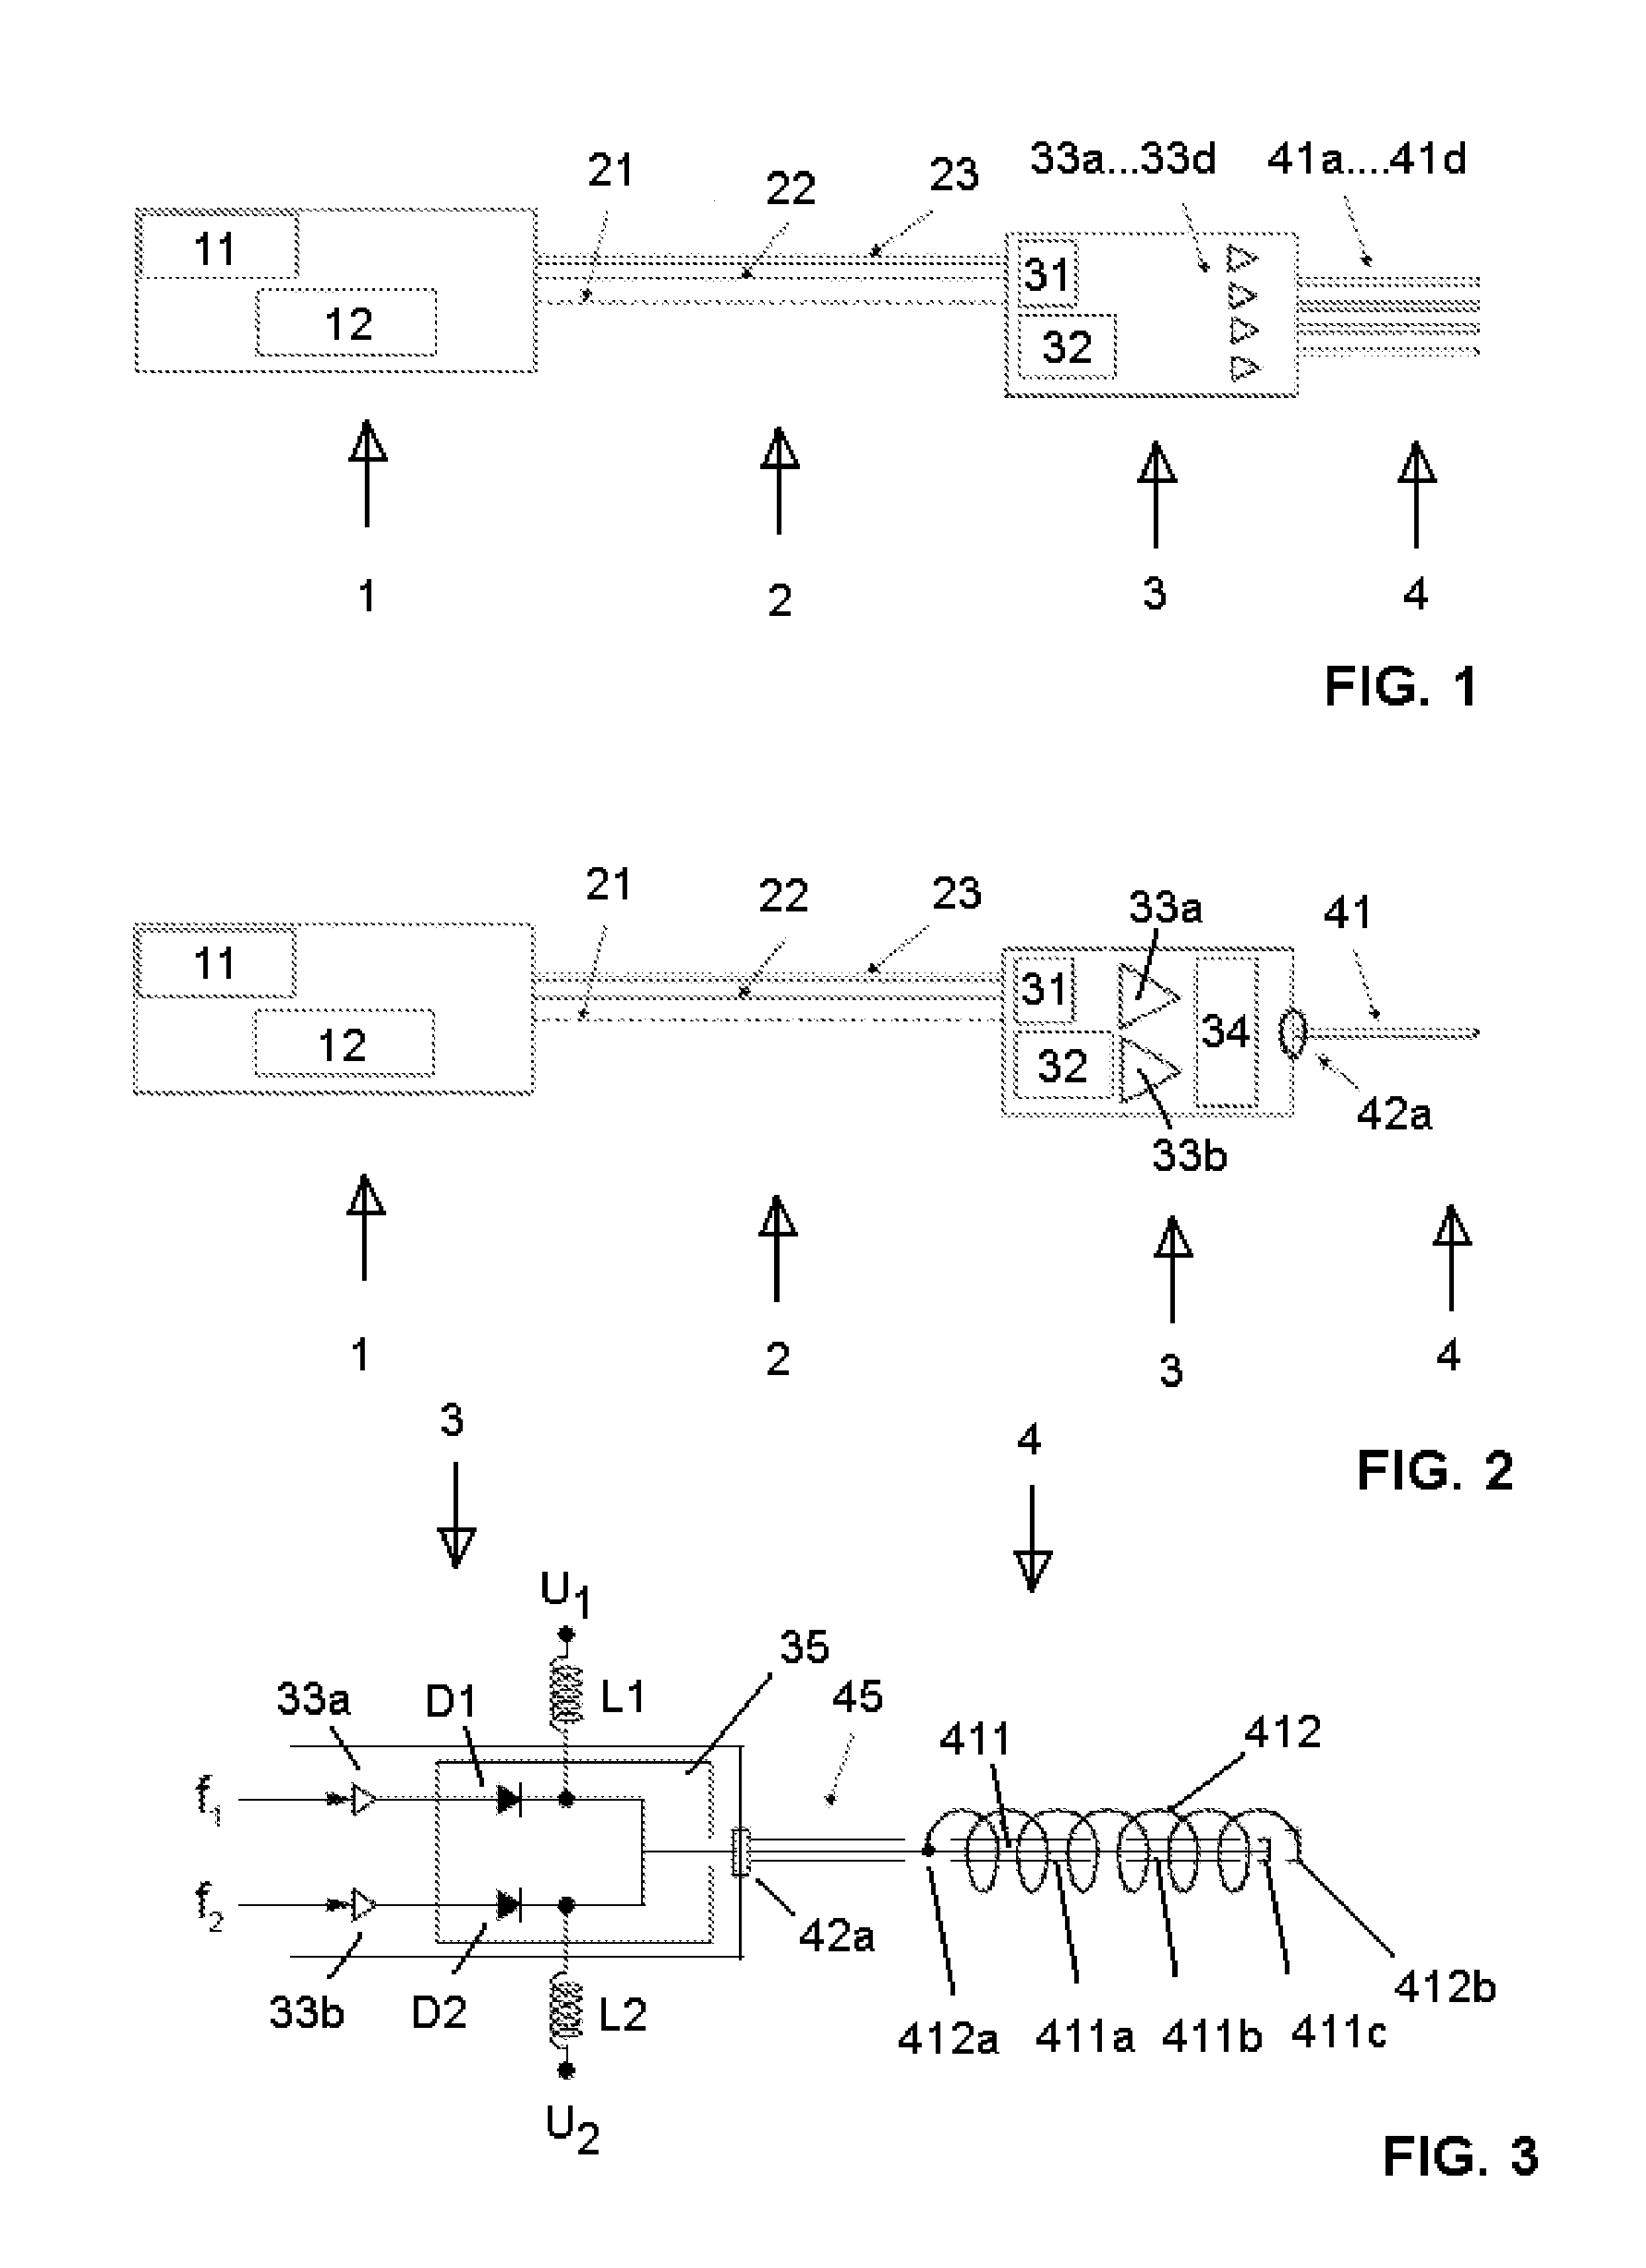 Electrosurgical ablation apparatus